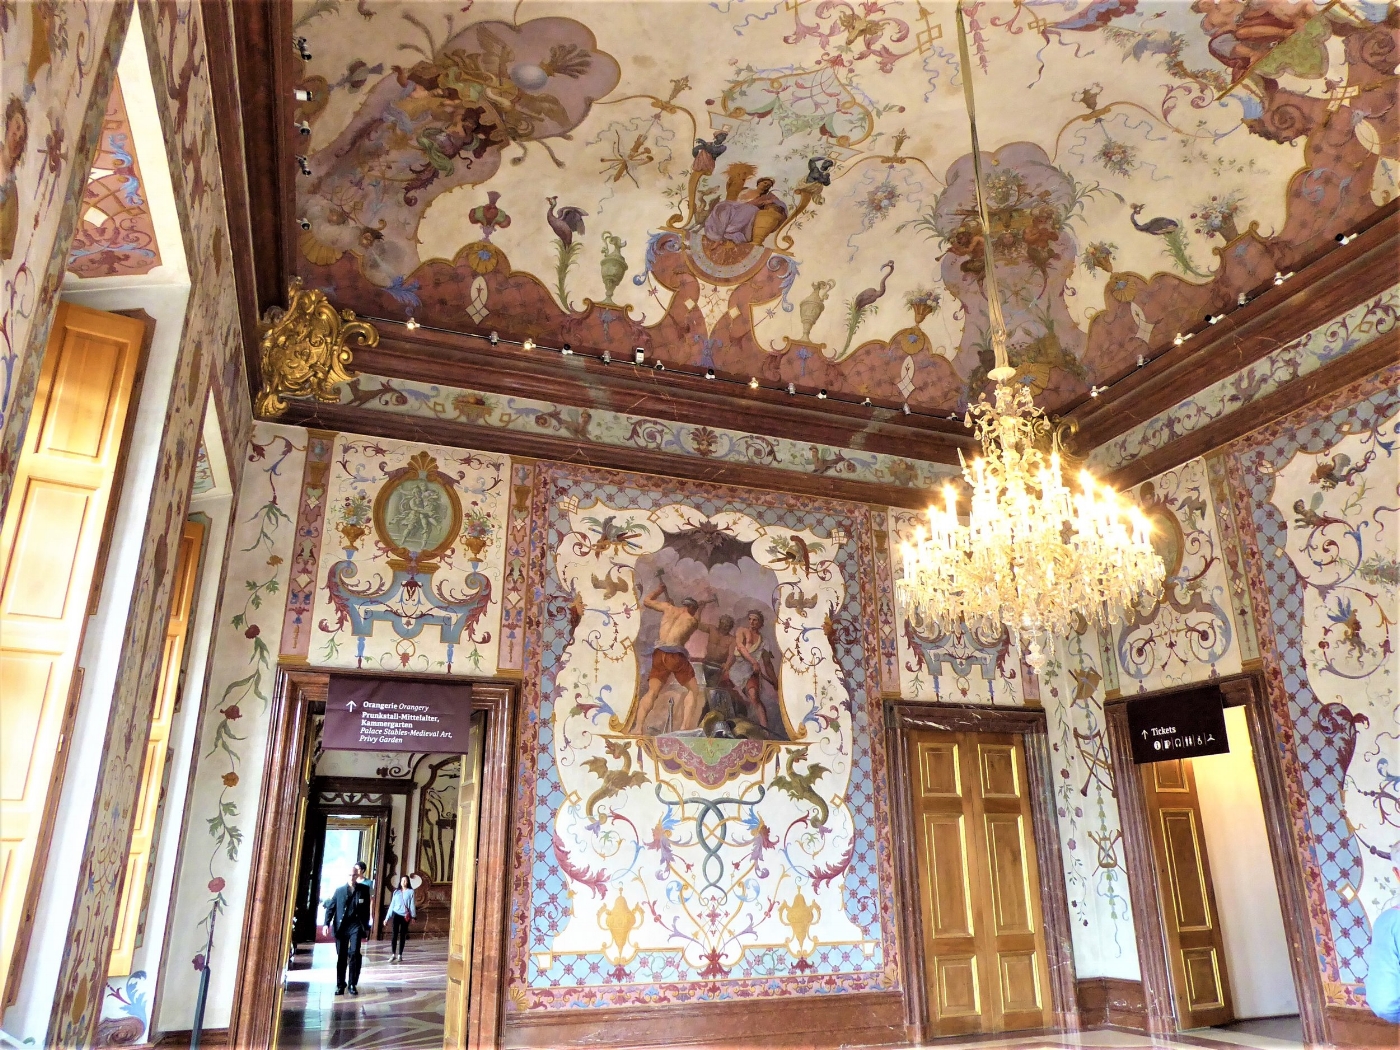 Hall with frescos in the Orangery - Belvedere